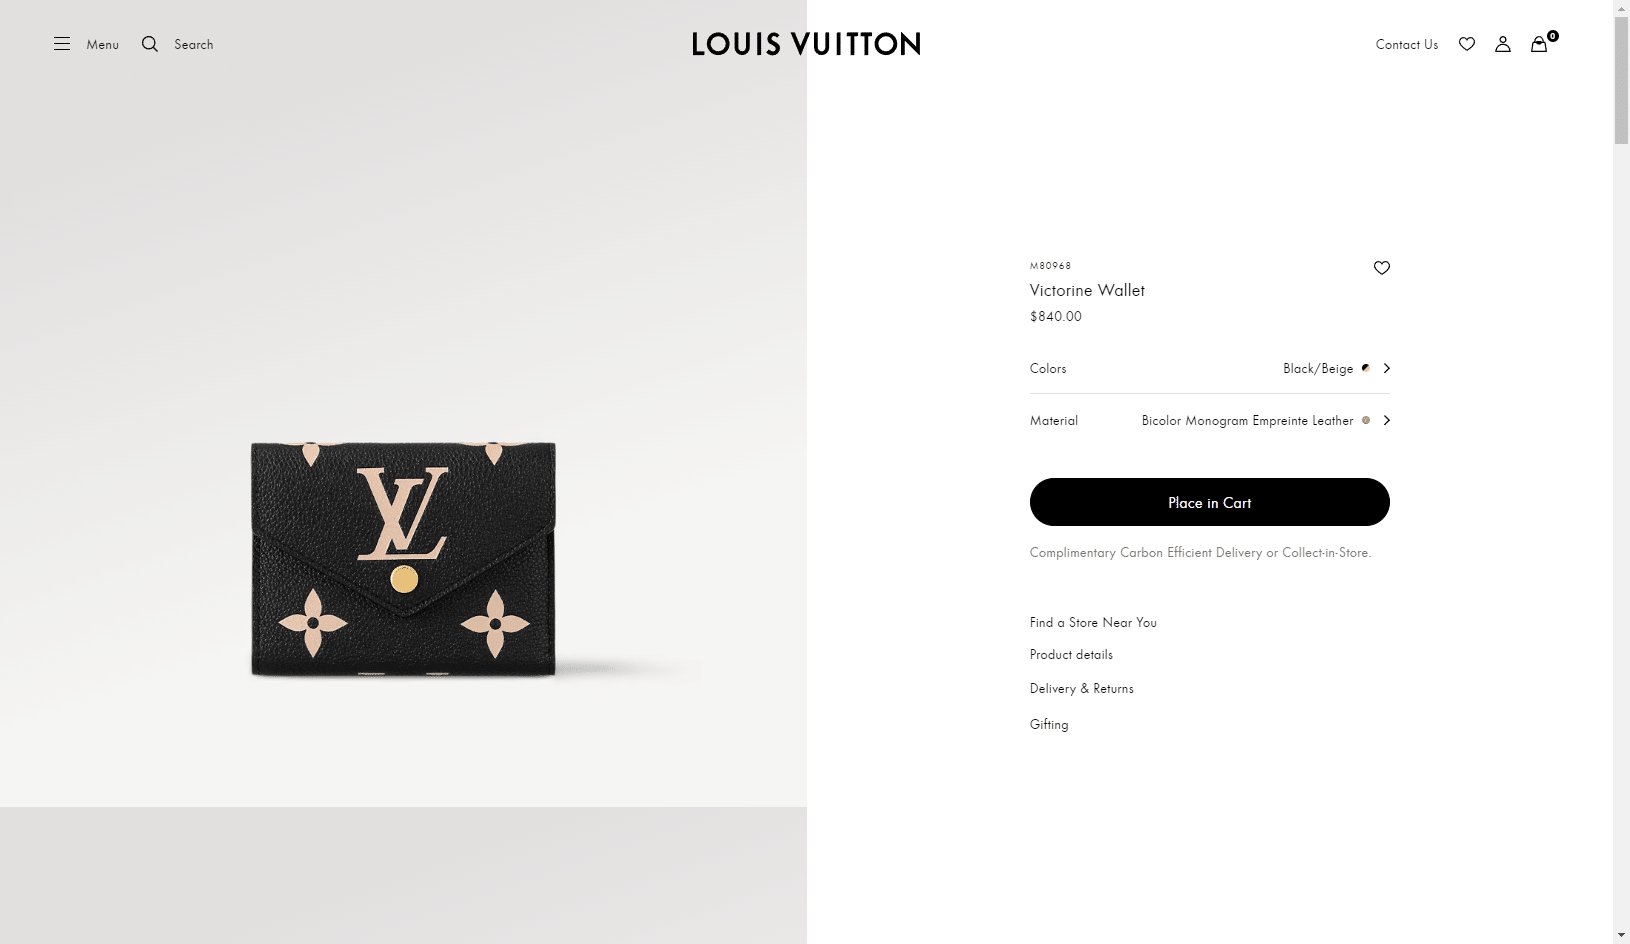 Victorine-Wallet--Monogram-Empreinte--All-Wallets-and-Small-Leather-Goods-M80968-LOUIS-VUITTON.png